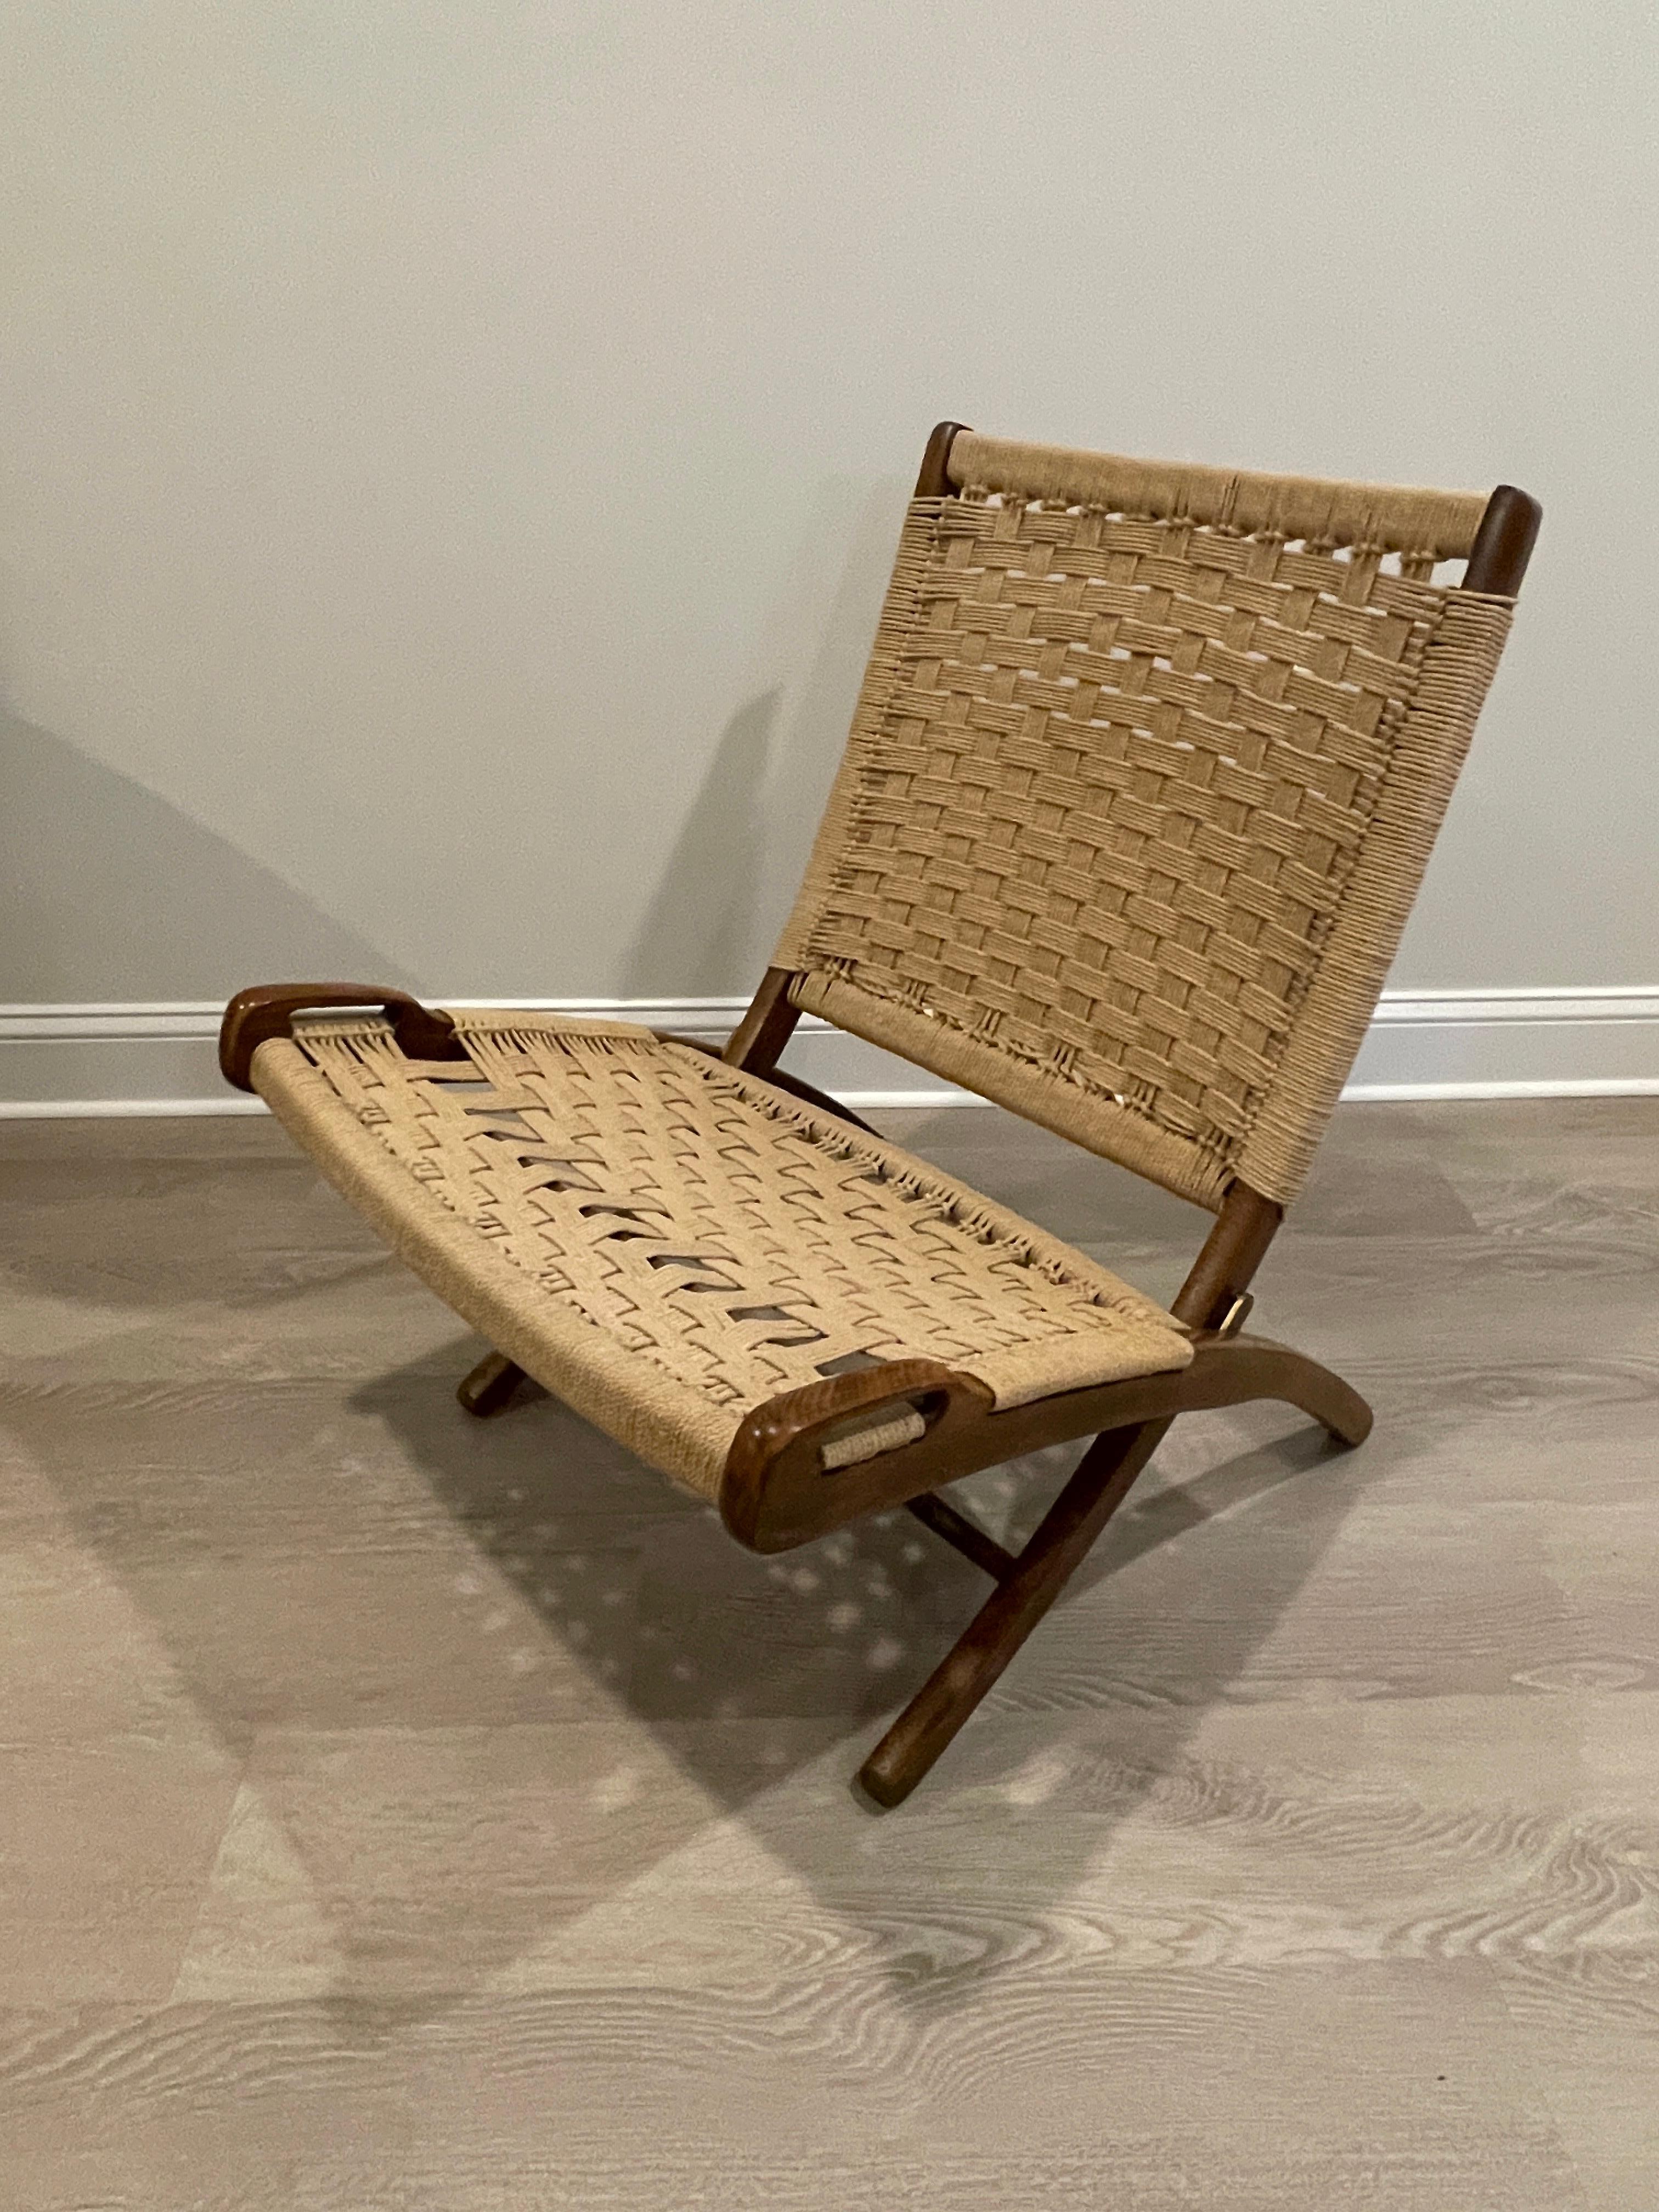 Hans Wegner style folding rope chair. In very good condition. Original rope weaving.